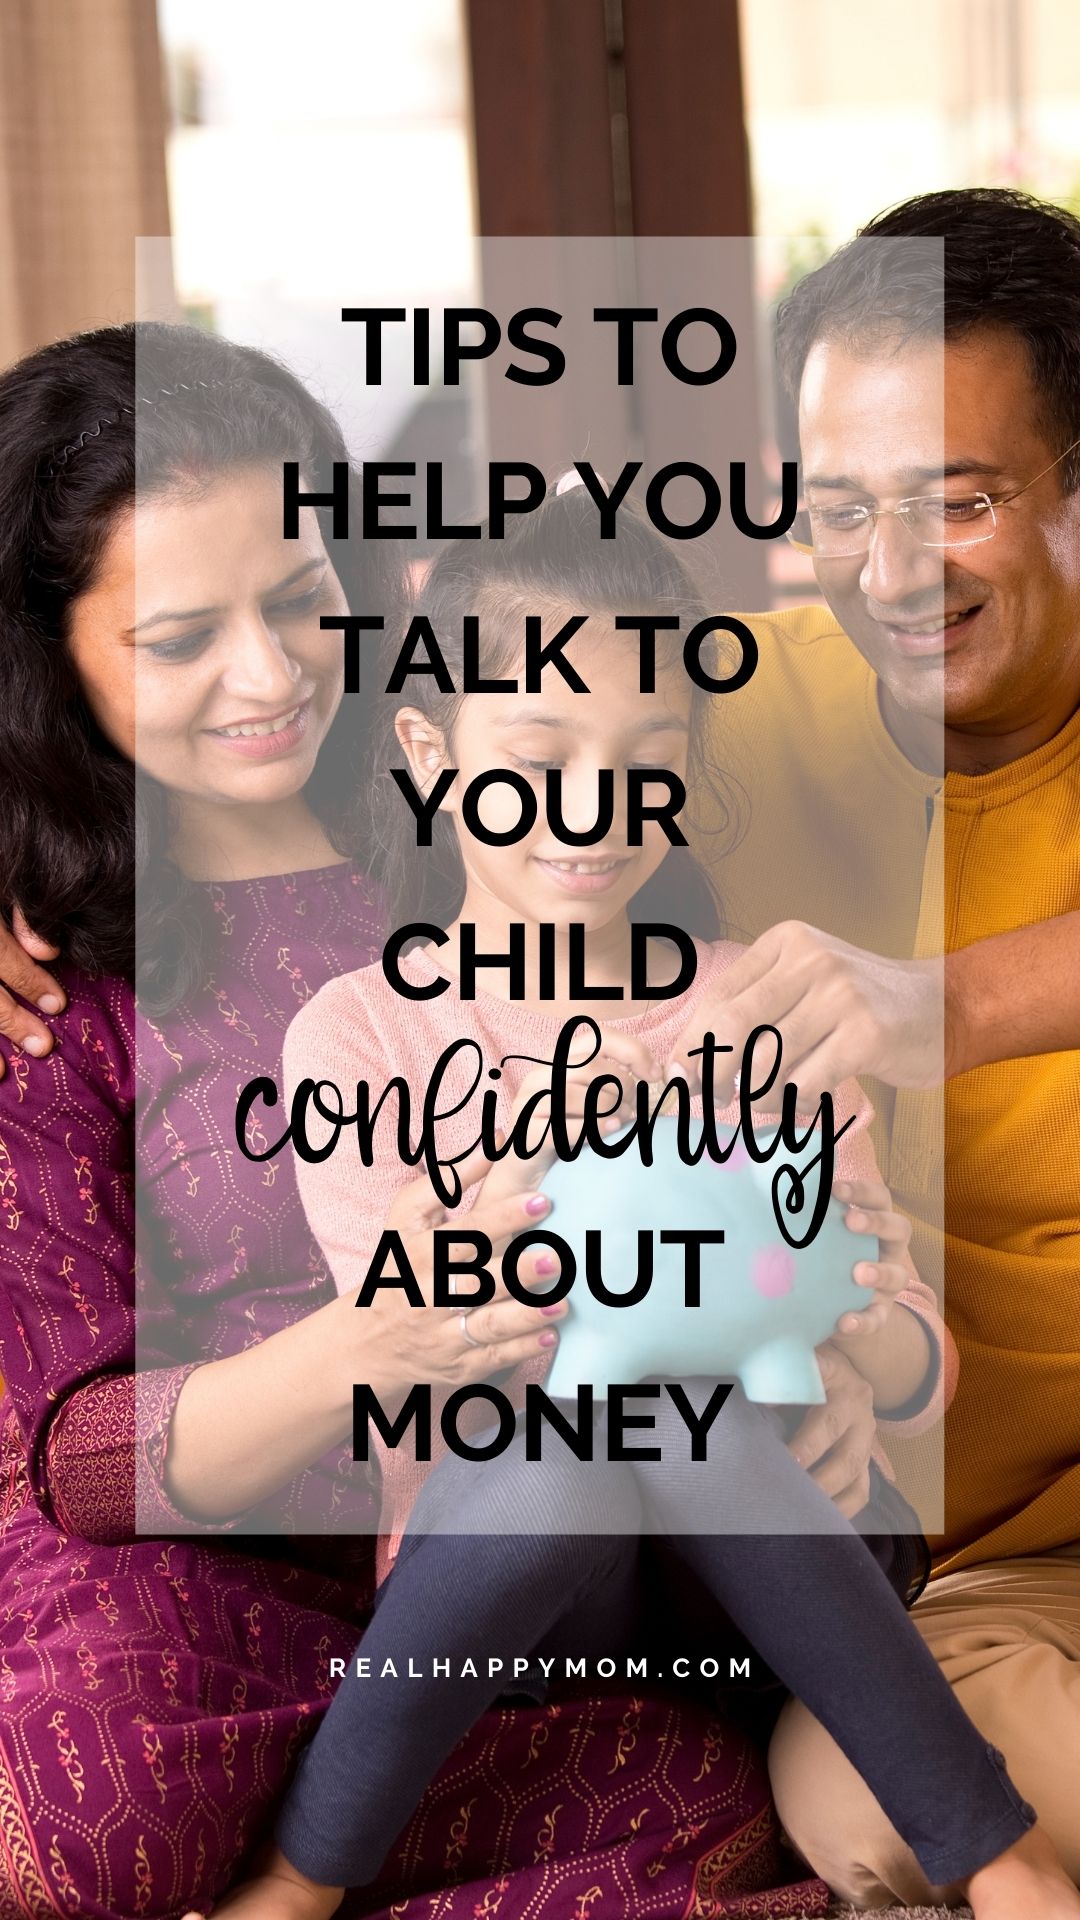 Tips on Empowering Your Kids About Money